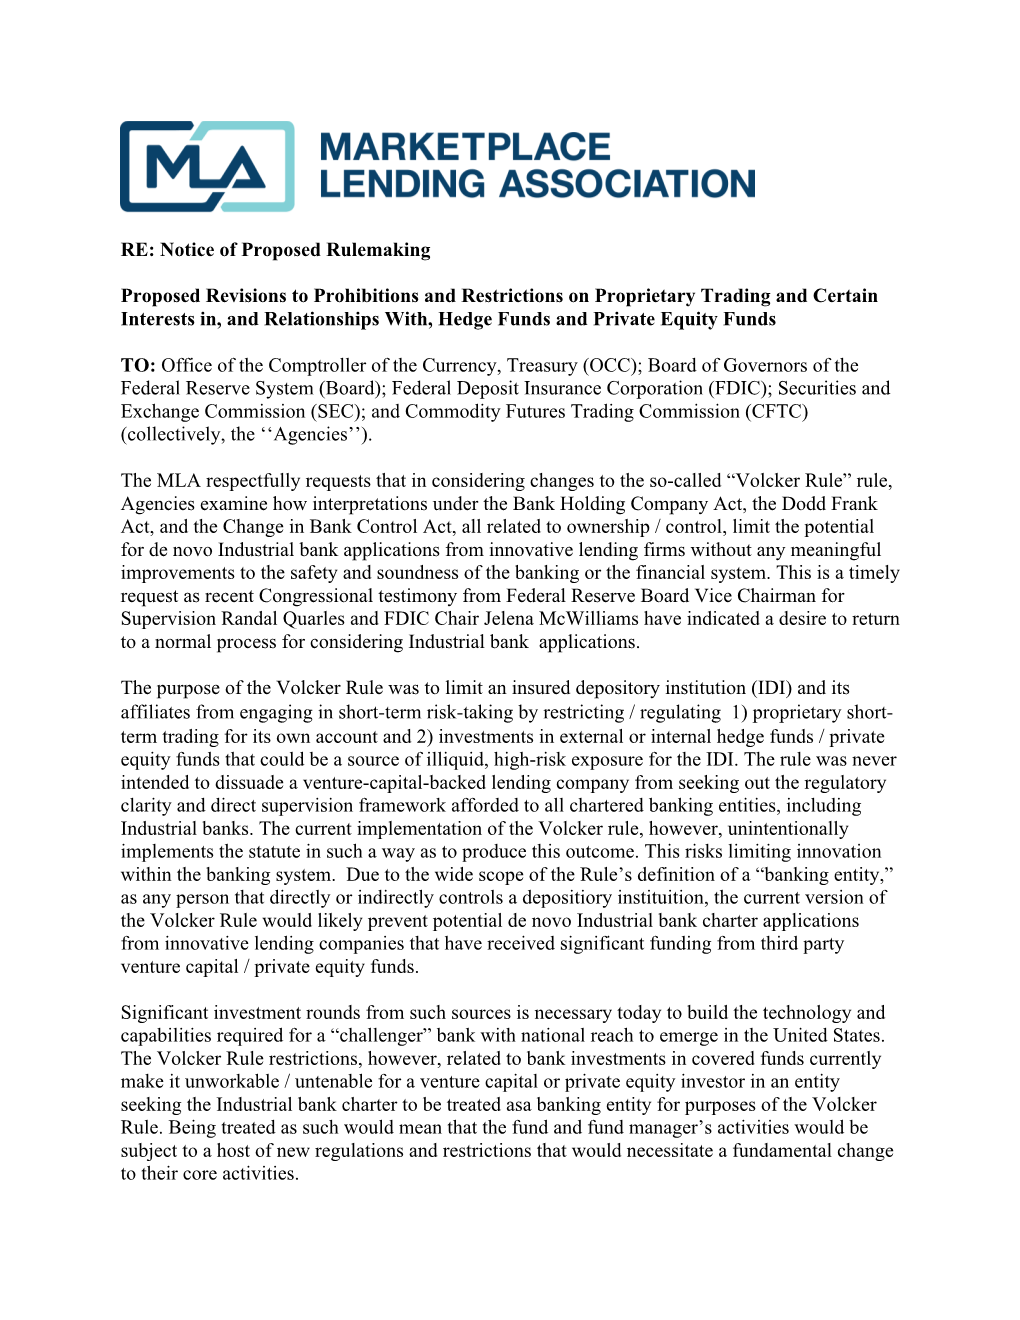 Members of the Marketplace Lending Association